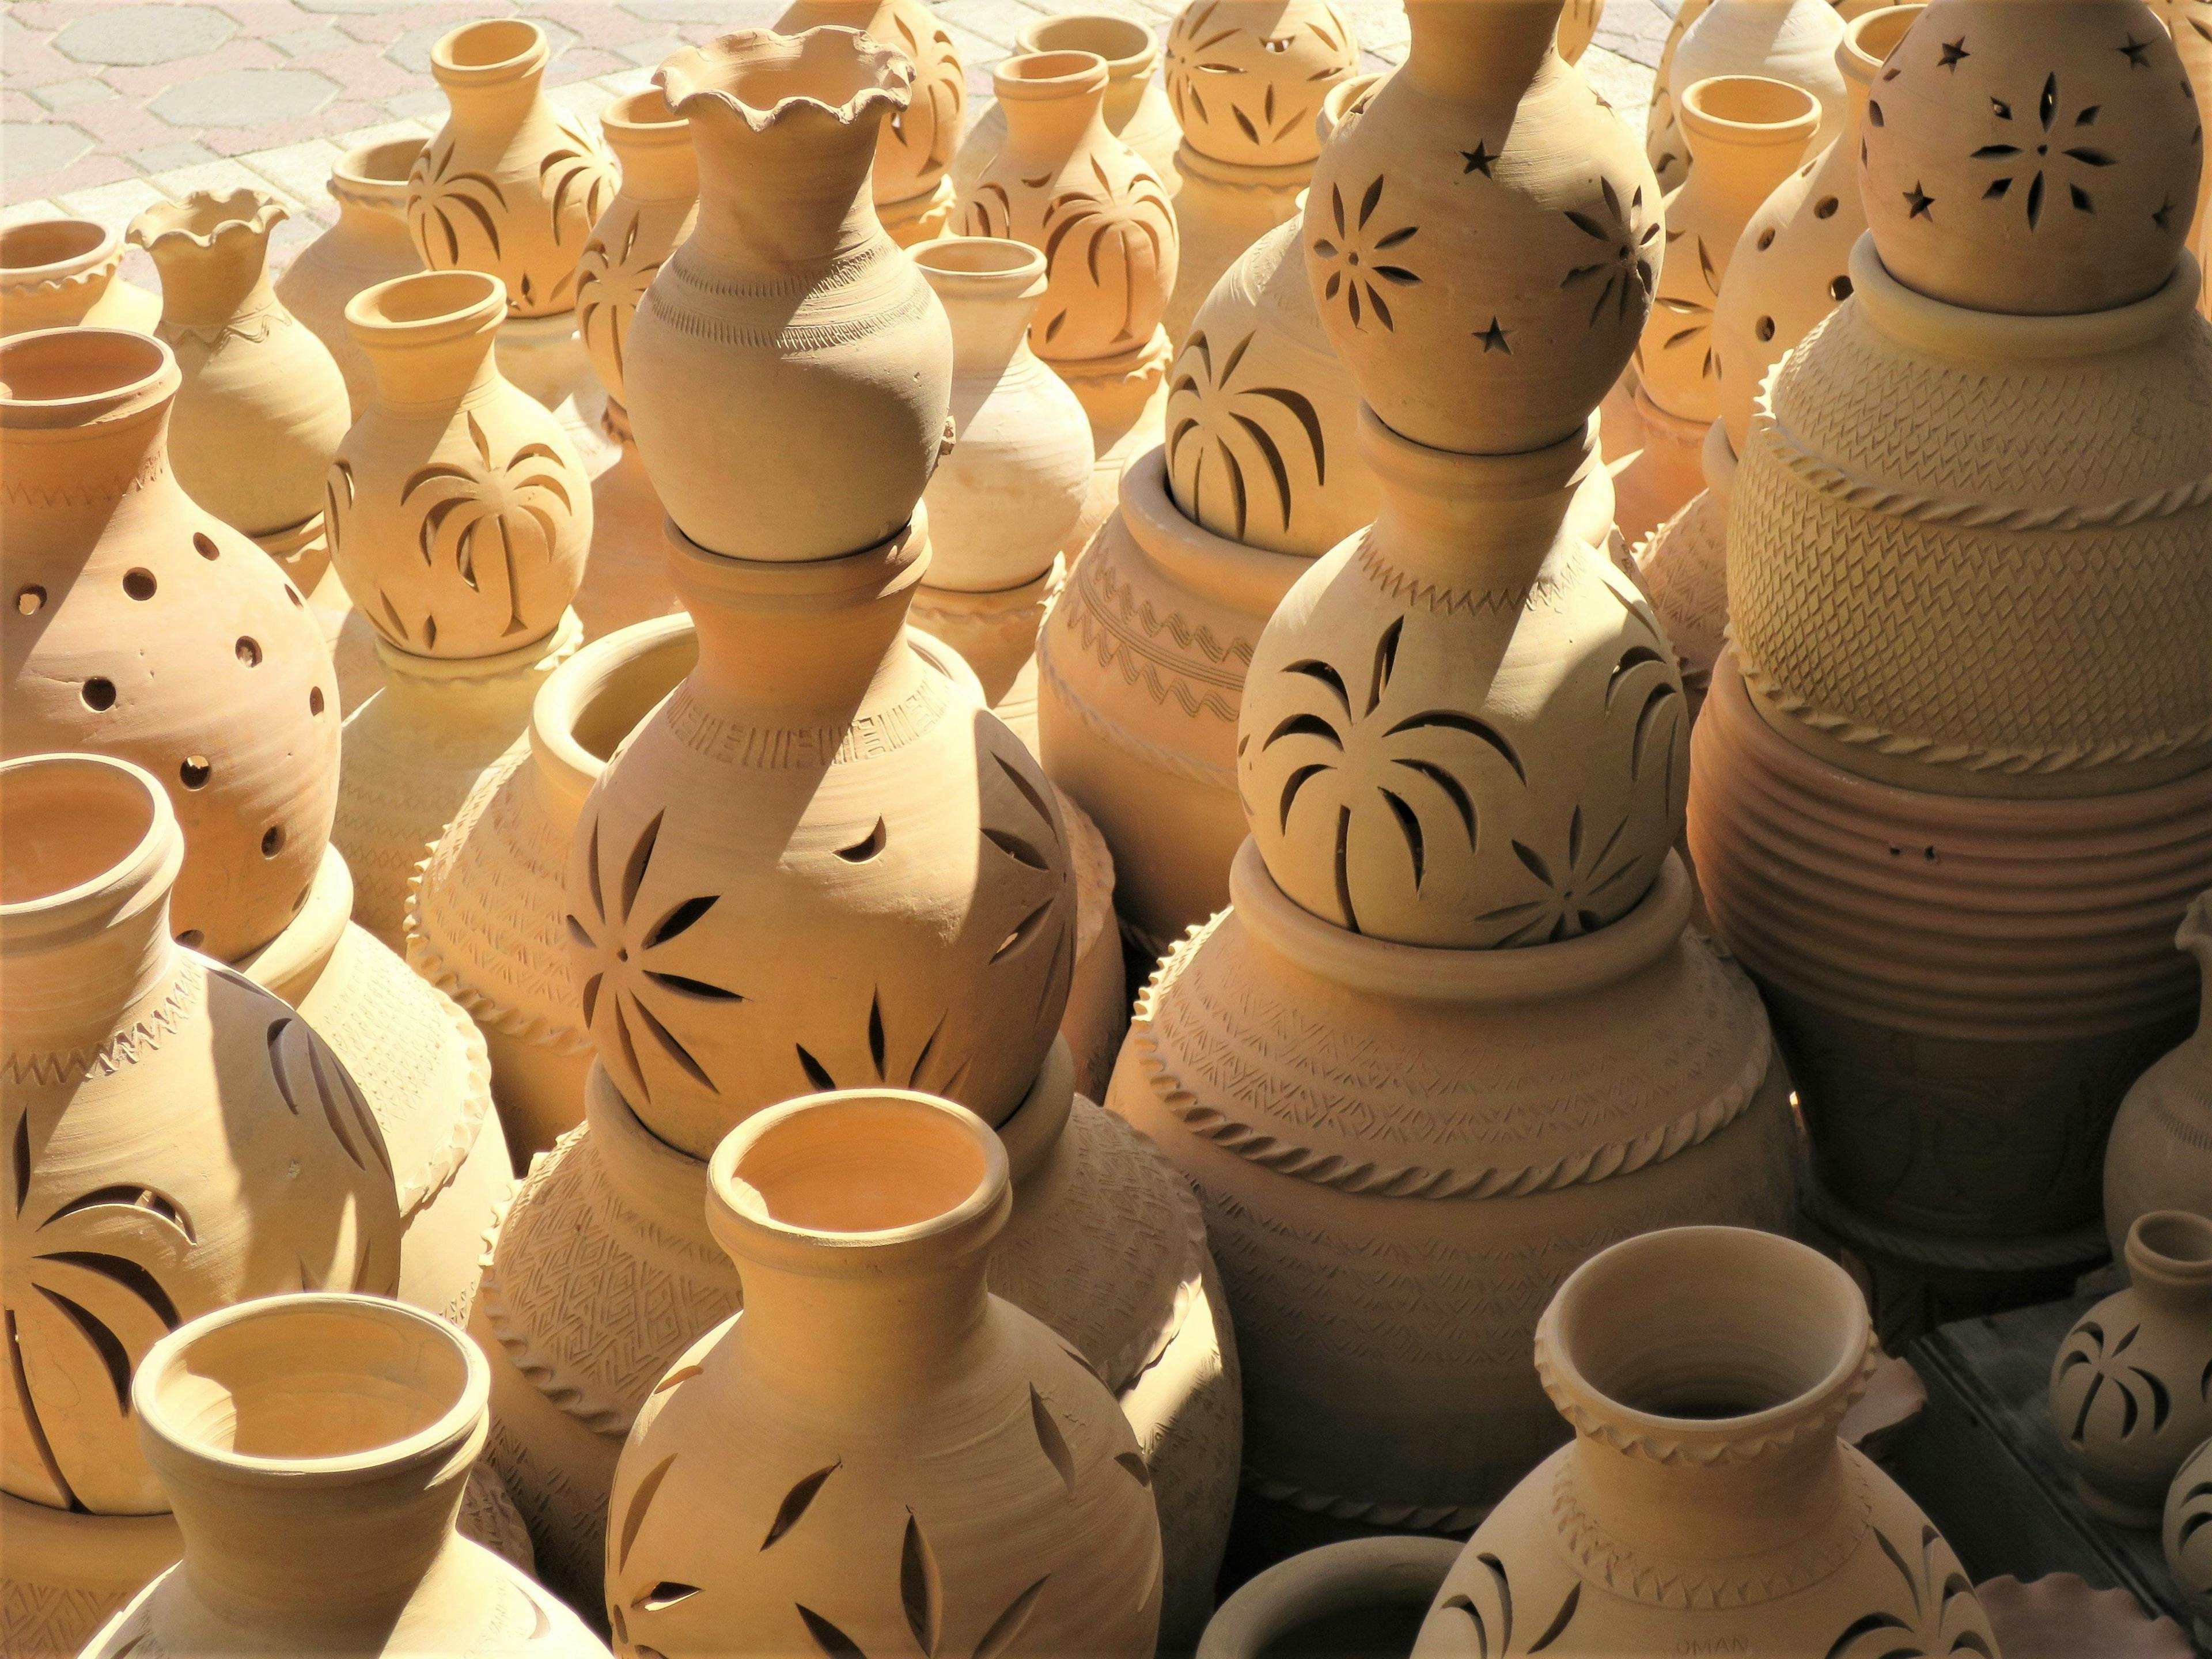 Pottery for sale in Omani market.